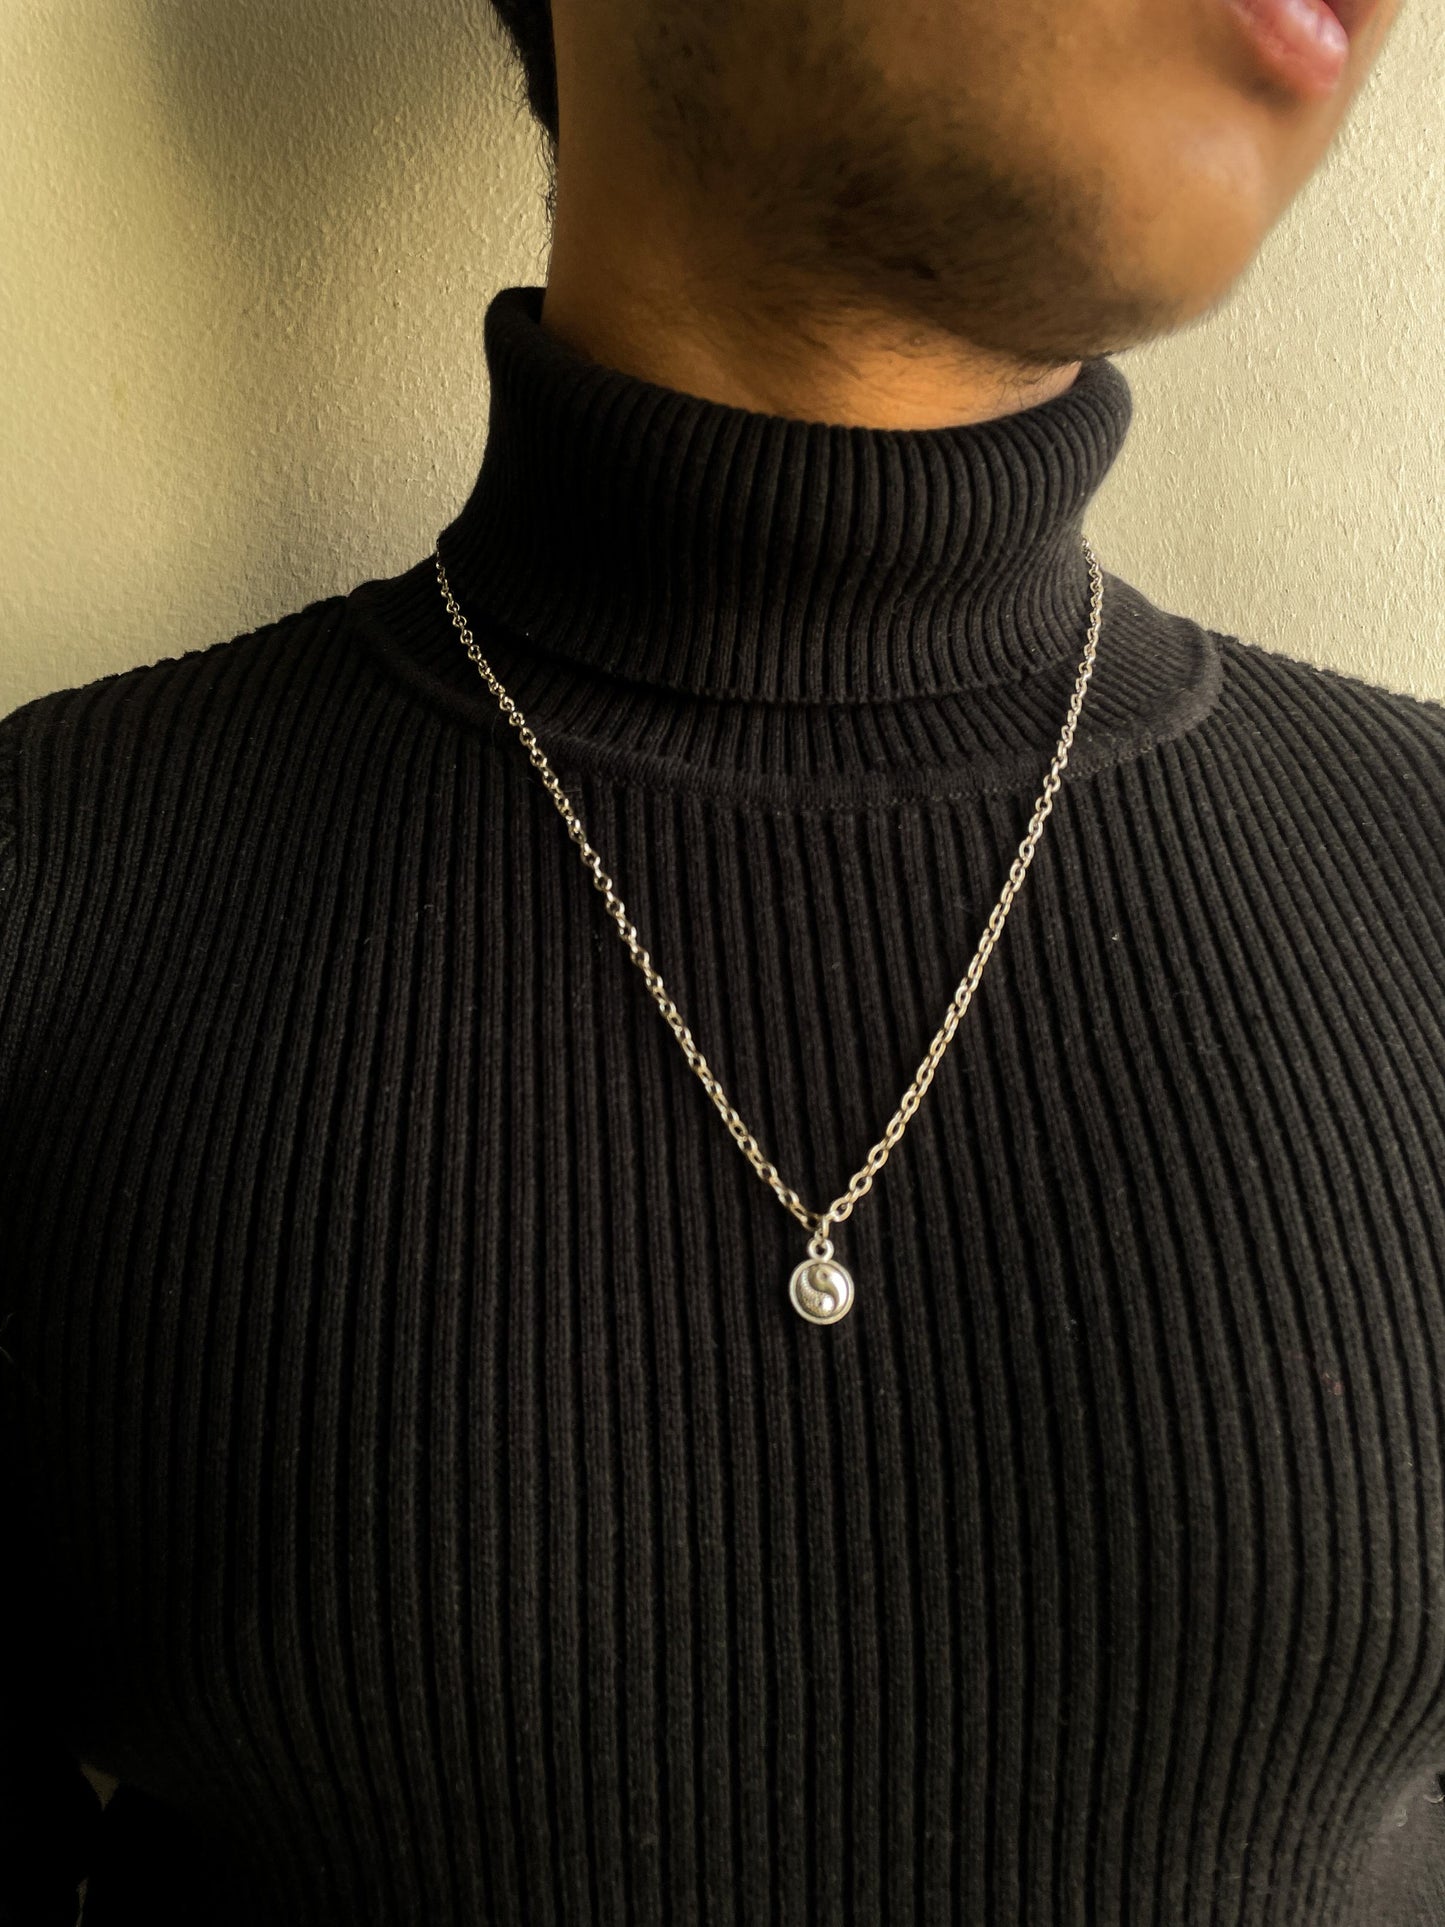 Yin Yang Silver Coin Pendant With Chain